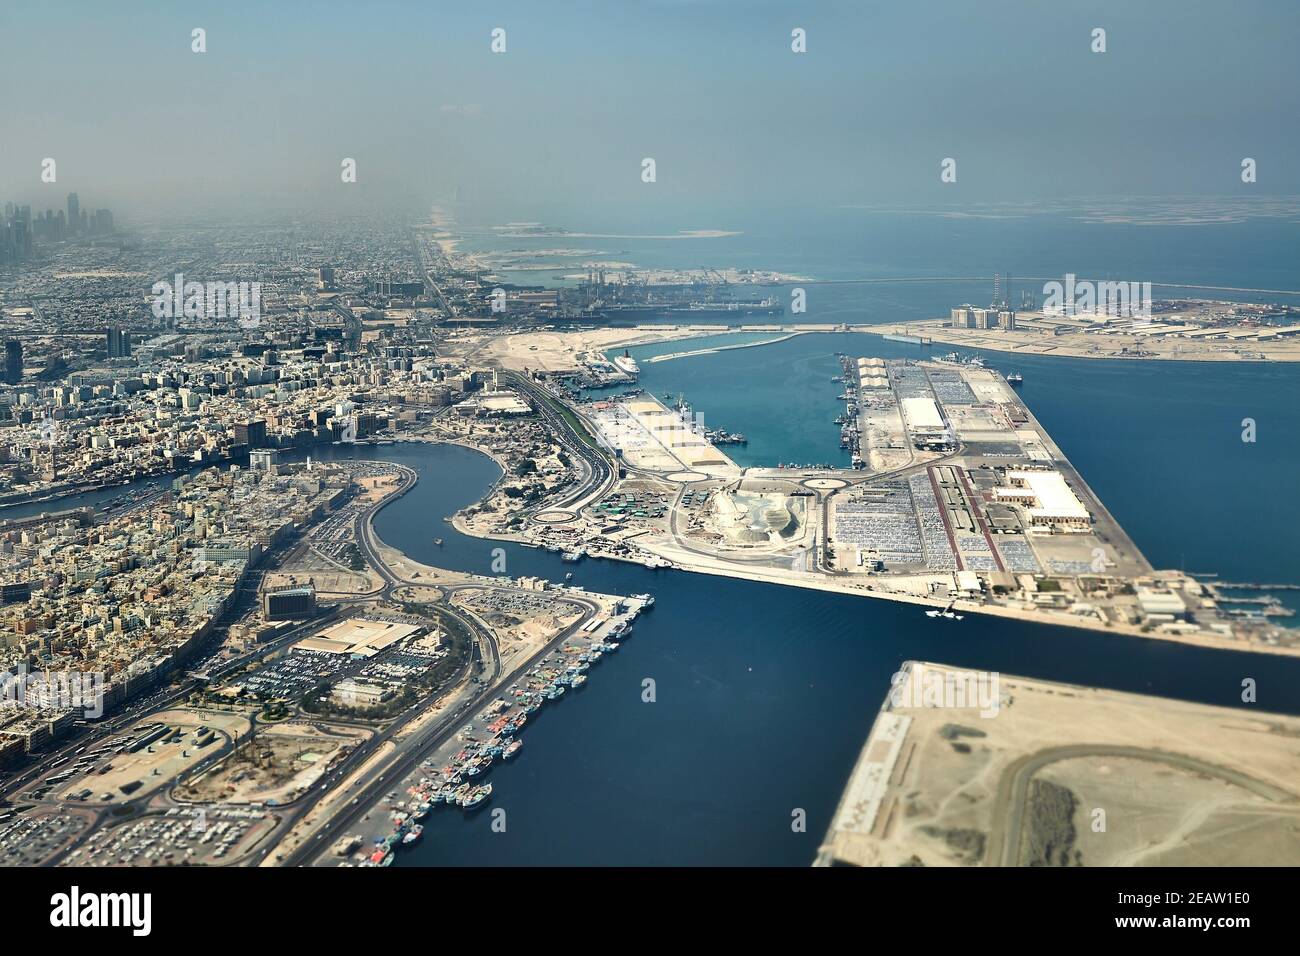 Dubai View from Air, insustrial ports Stock Photo